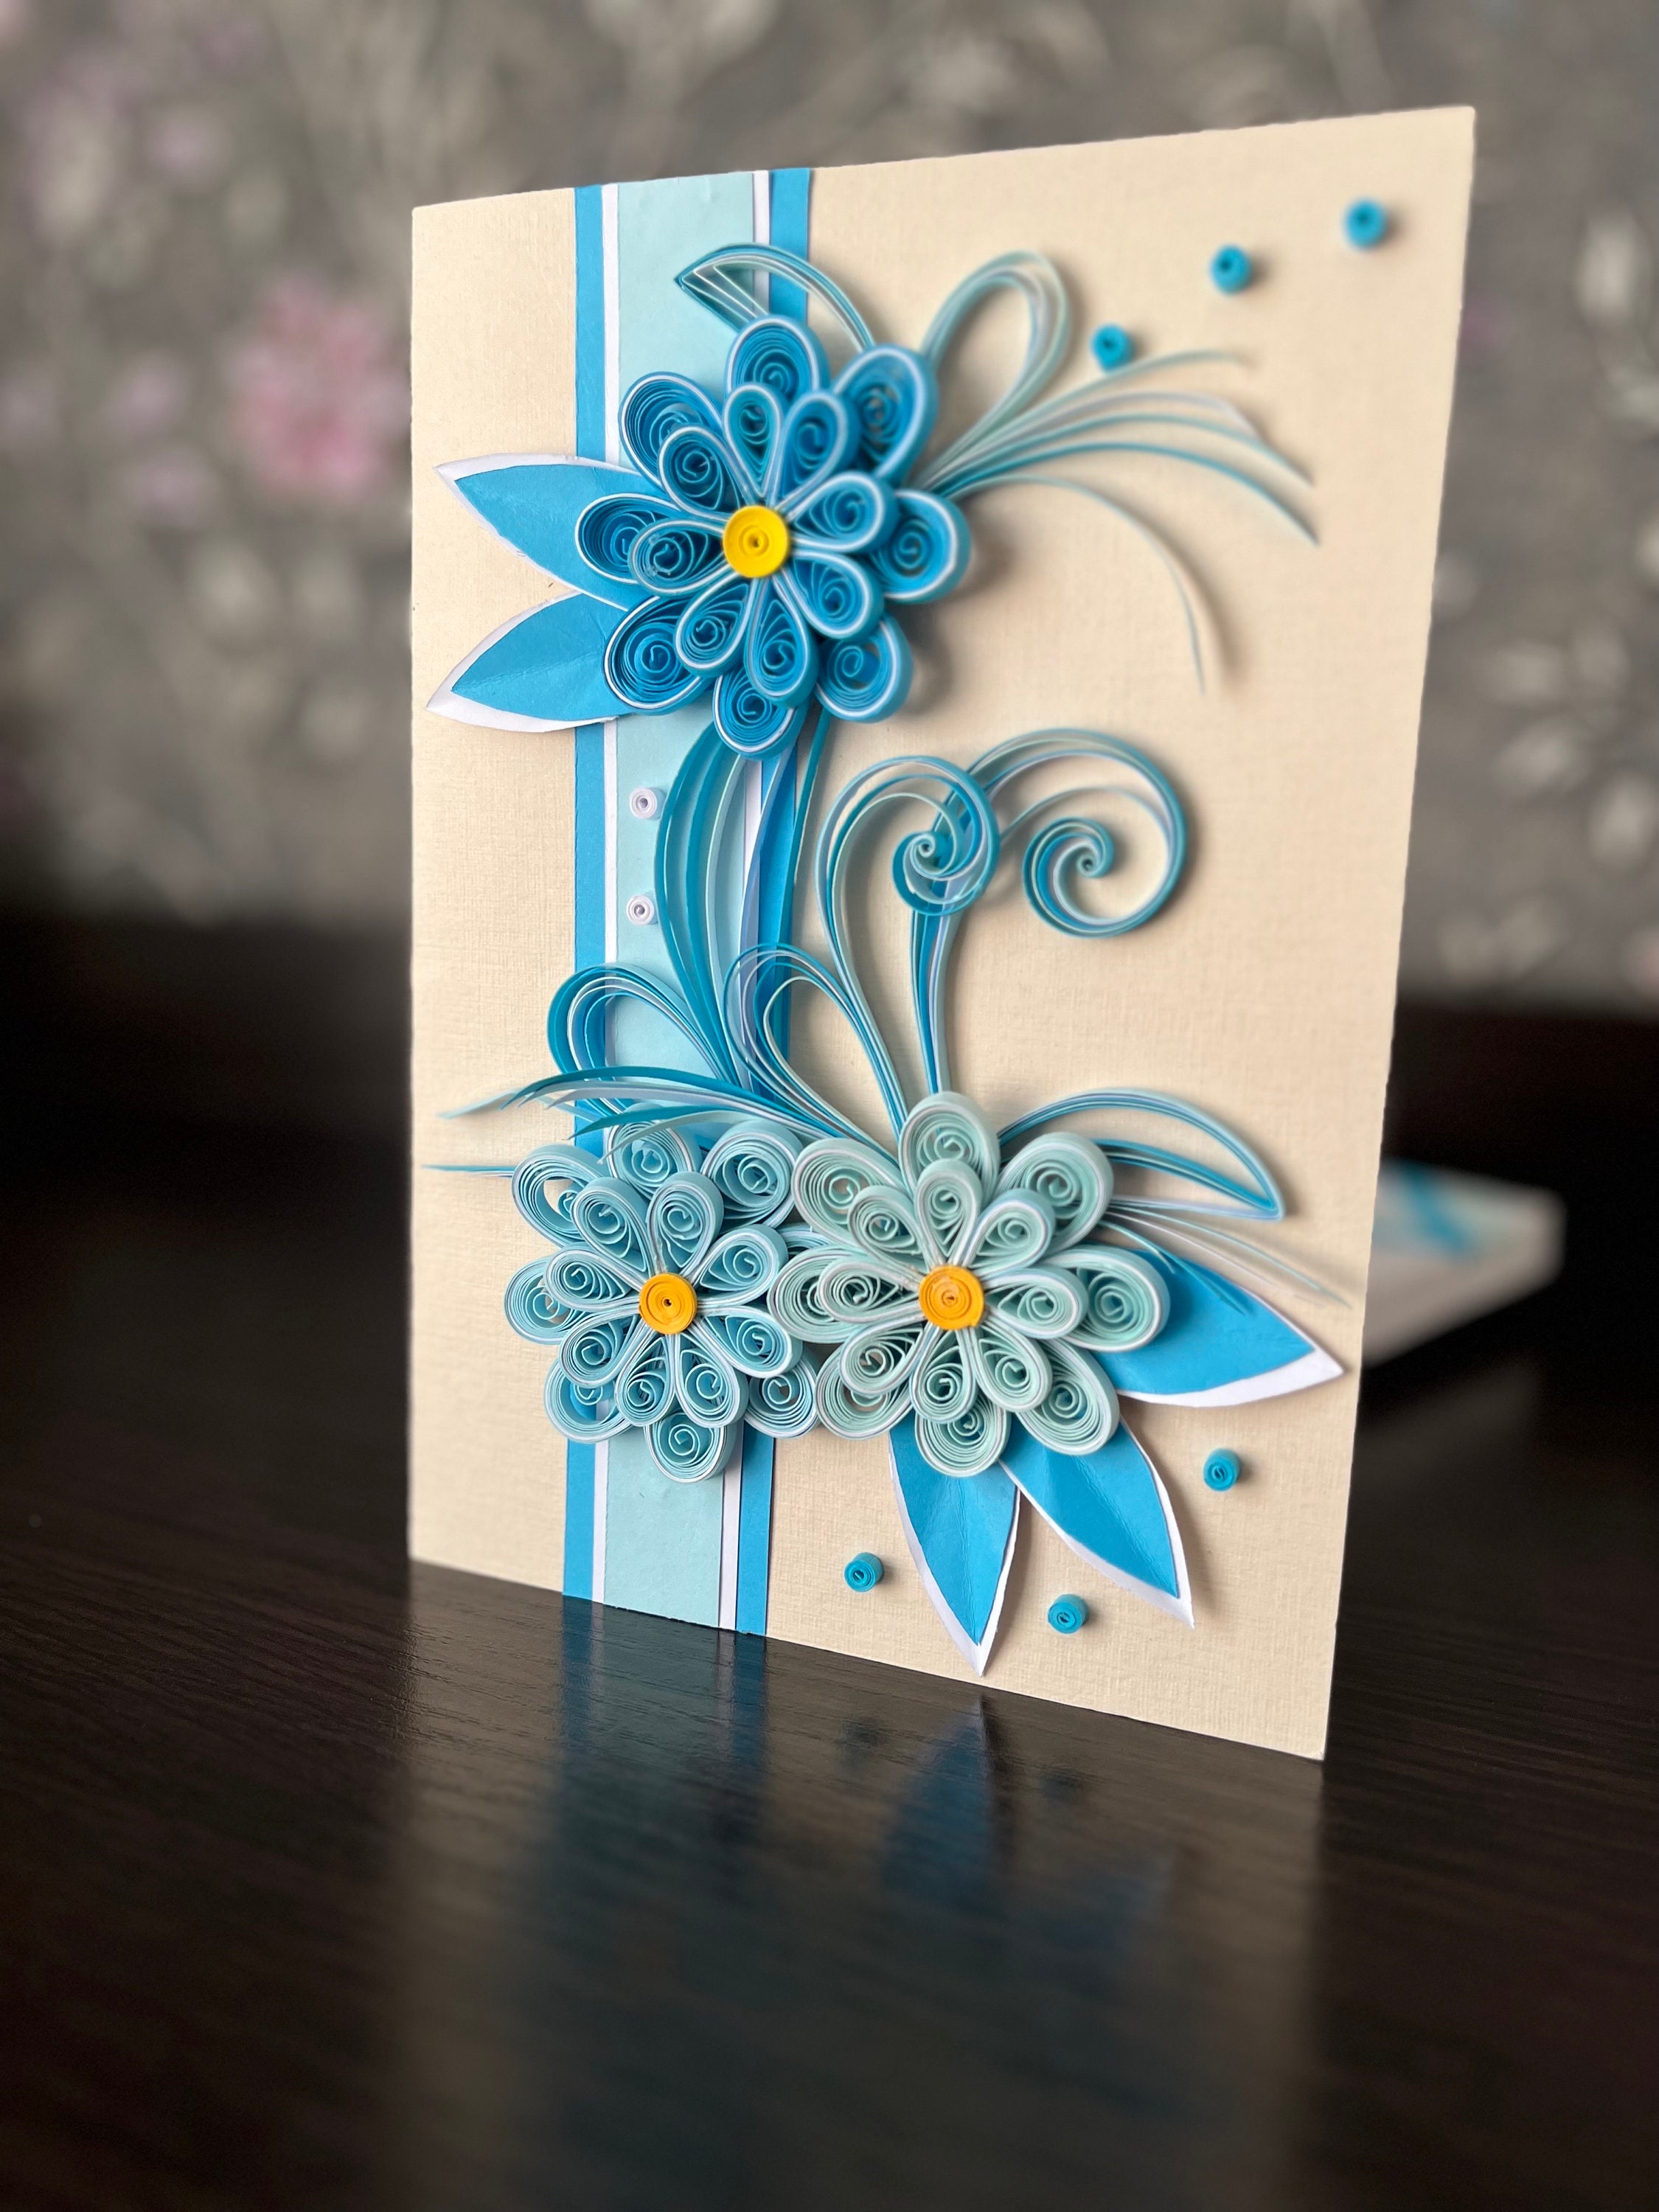 Easy Birthday Card Making With Paper, Handmade Greeting Card, Paper Craft  @devoartsandcrafts4787